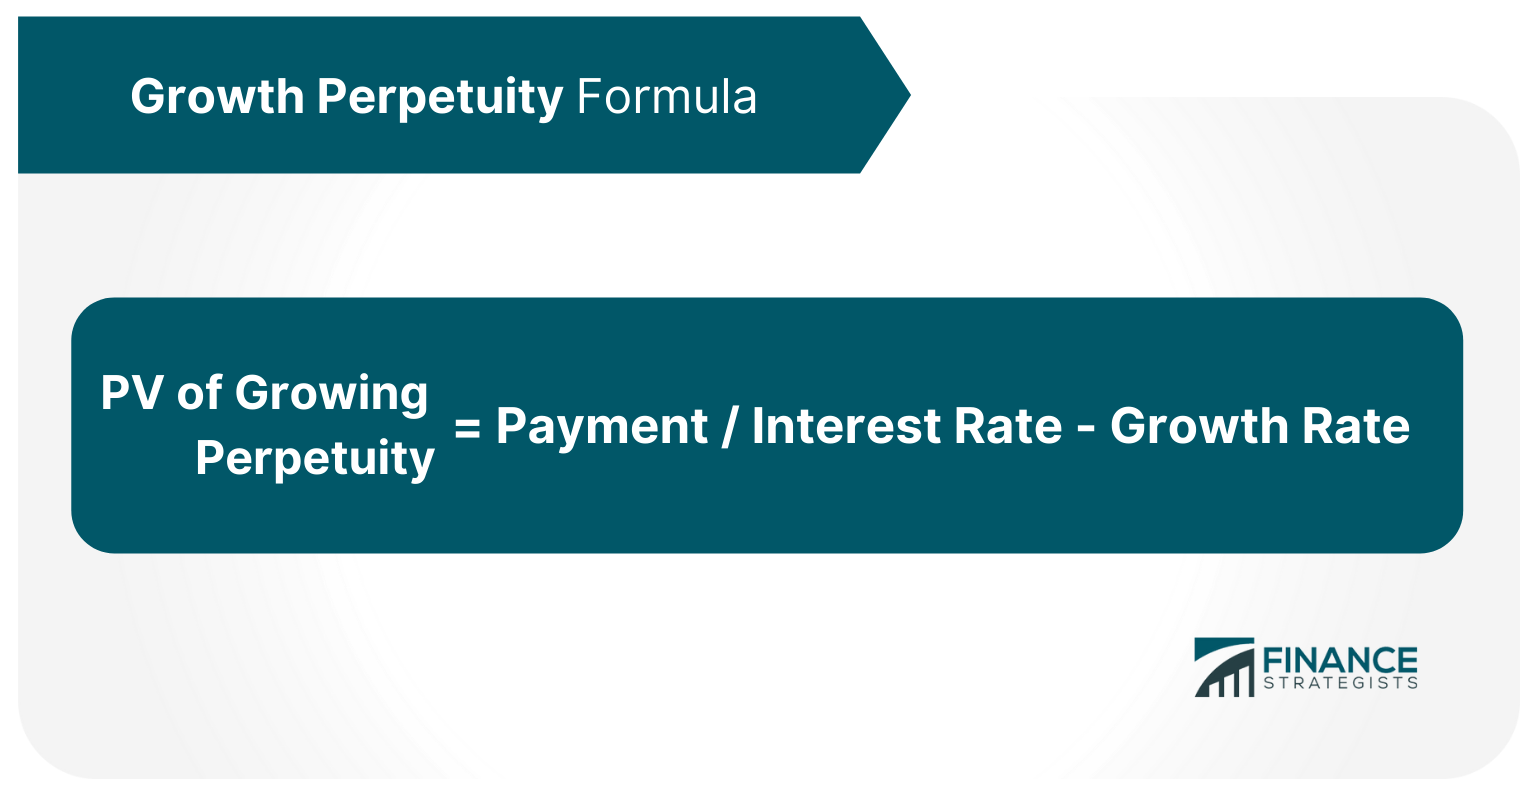 Growth Perpetuity Formula